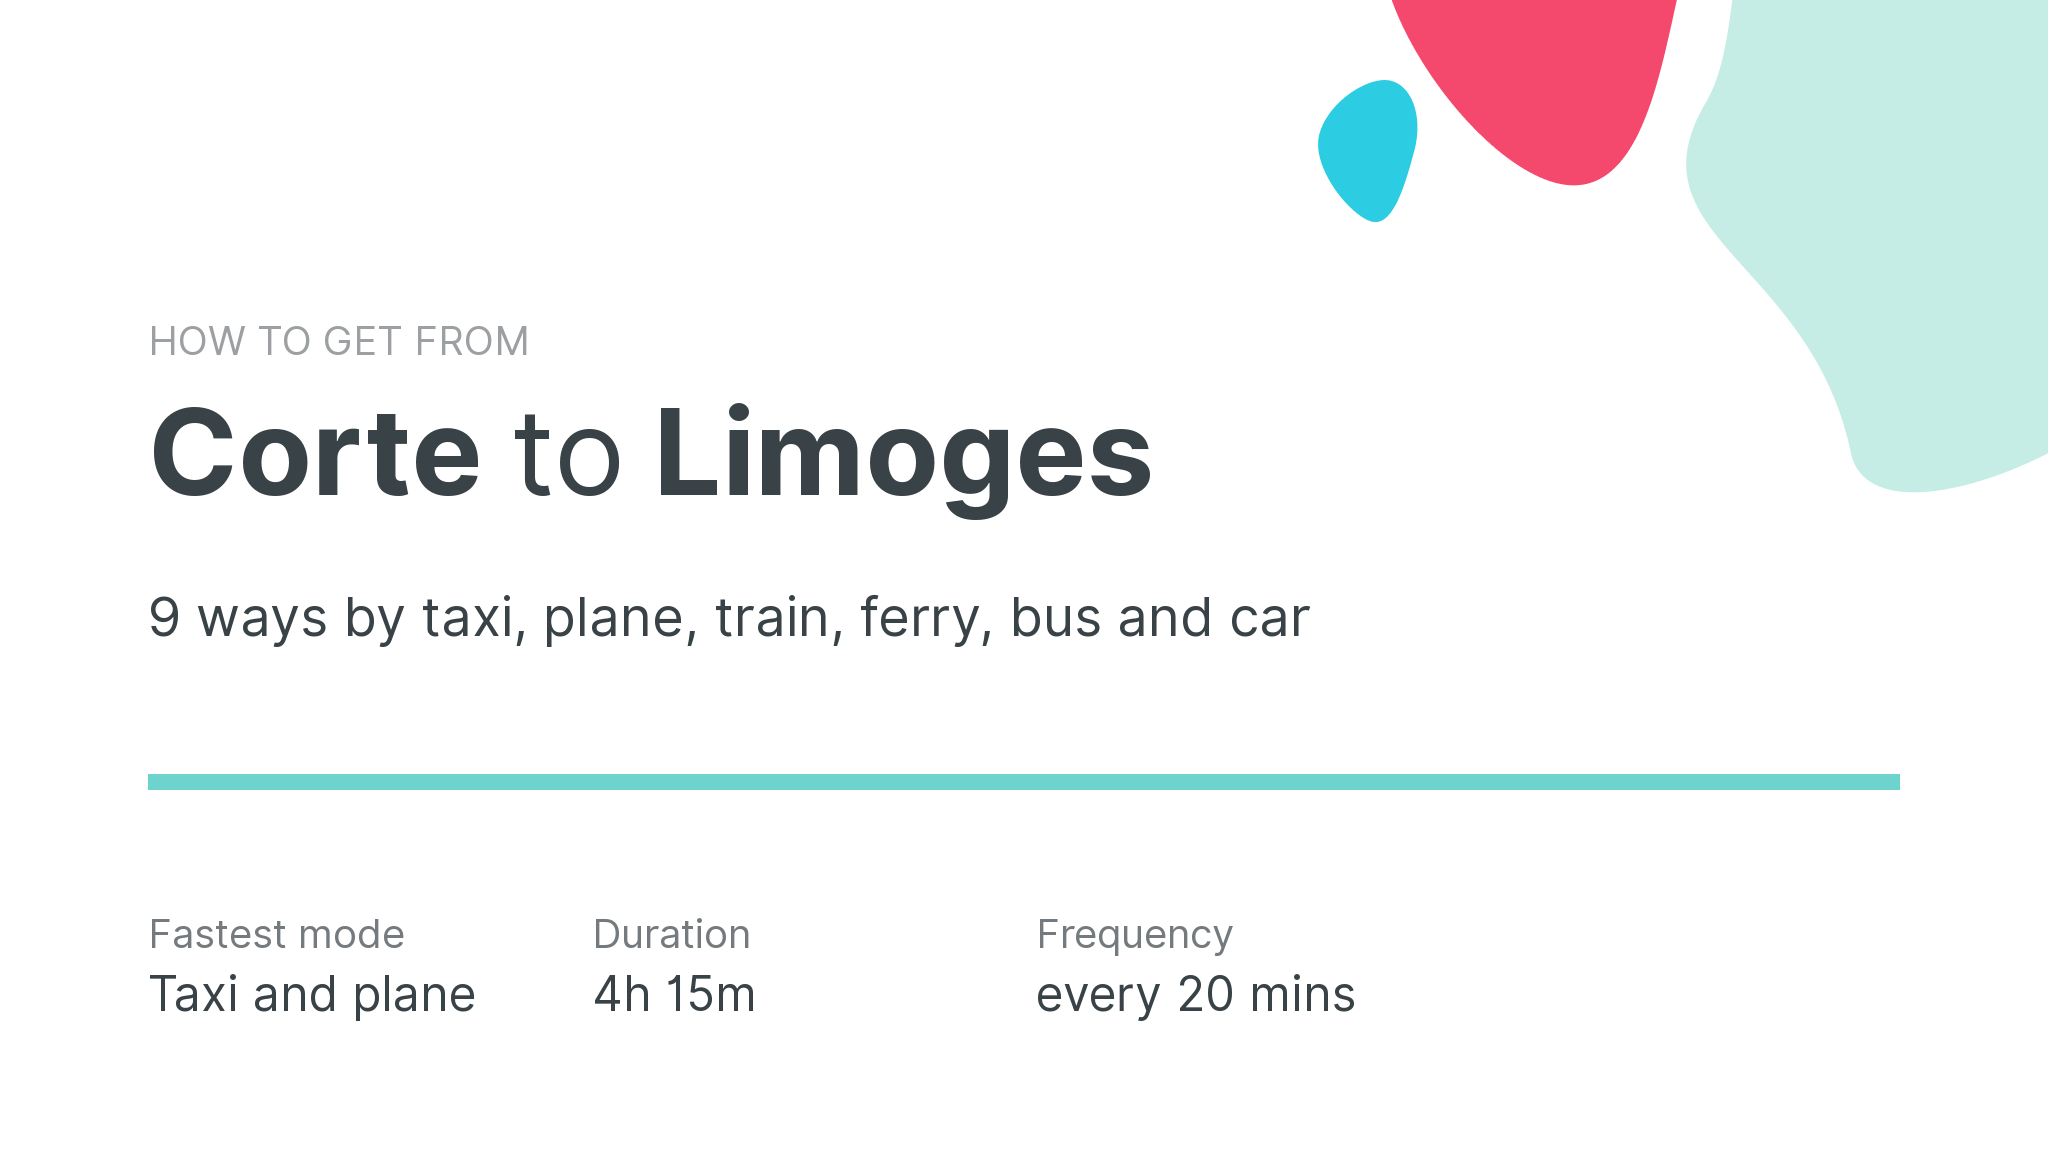 How do I get from Corte to Limoges